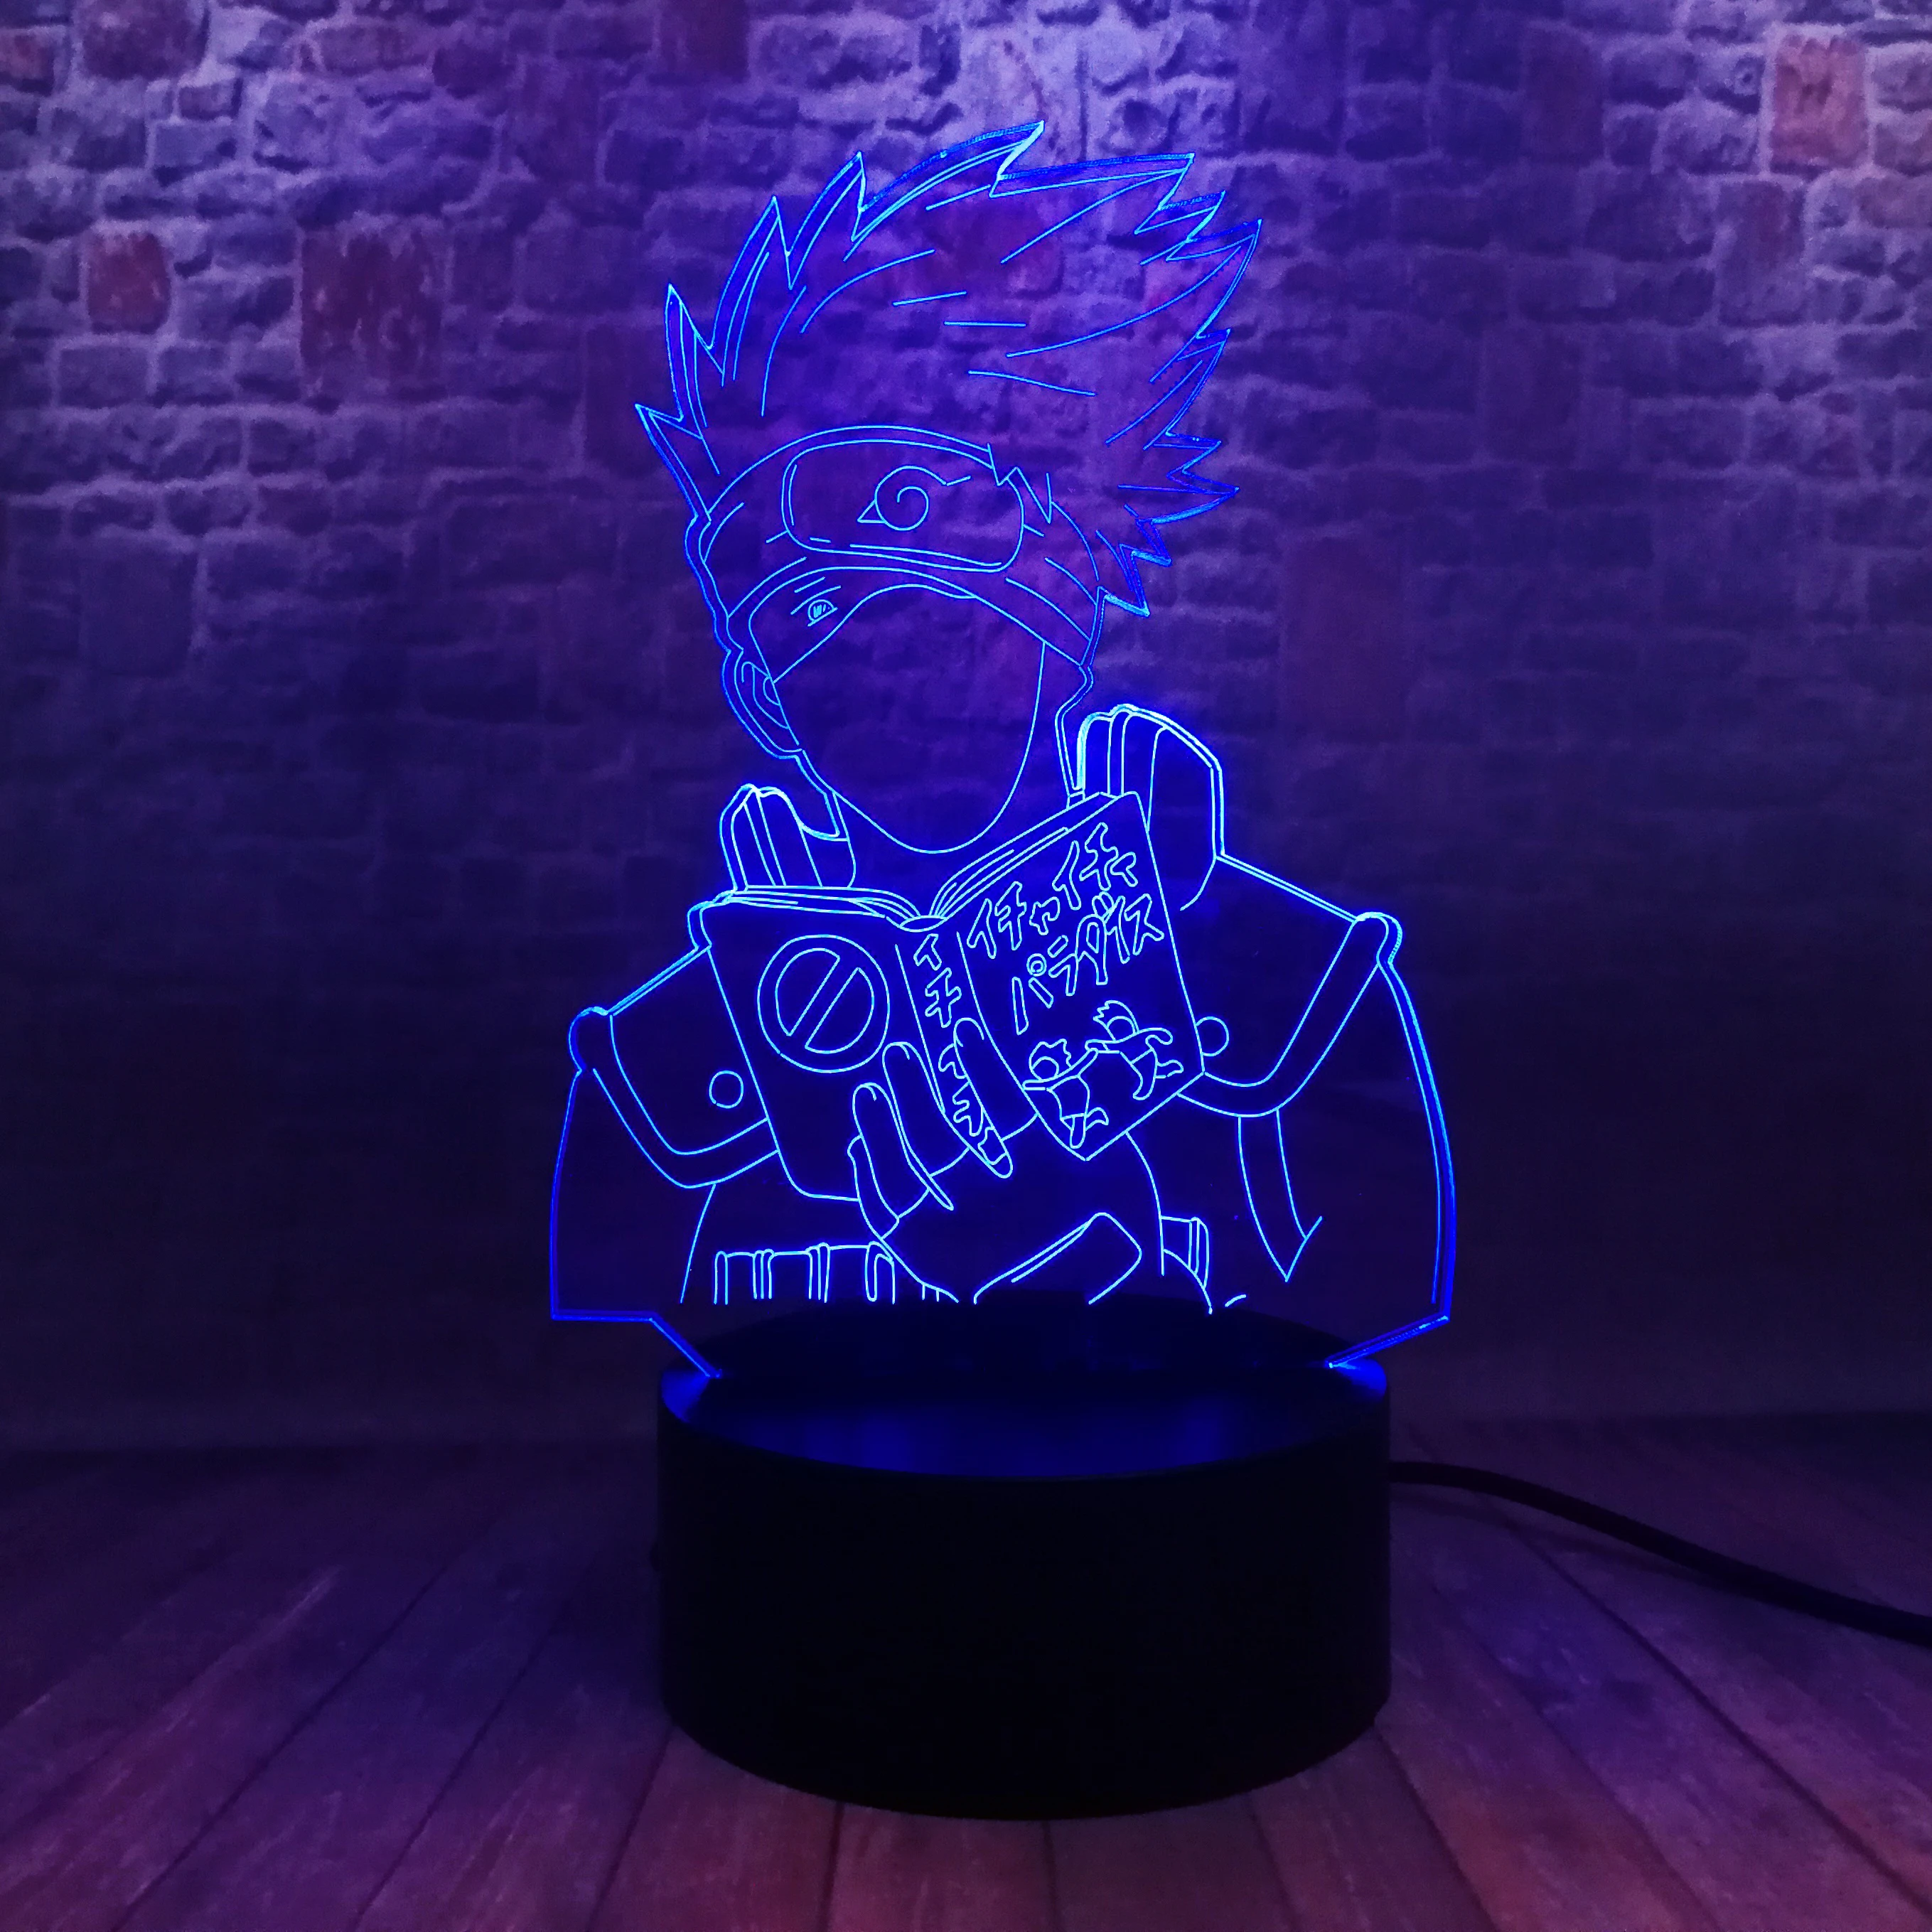 Details about   NARUTO Shippuden Kakashi 3D LED Night Light Touch Table Lamp Xams Gift  7 color 